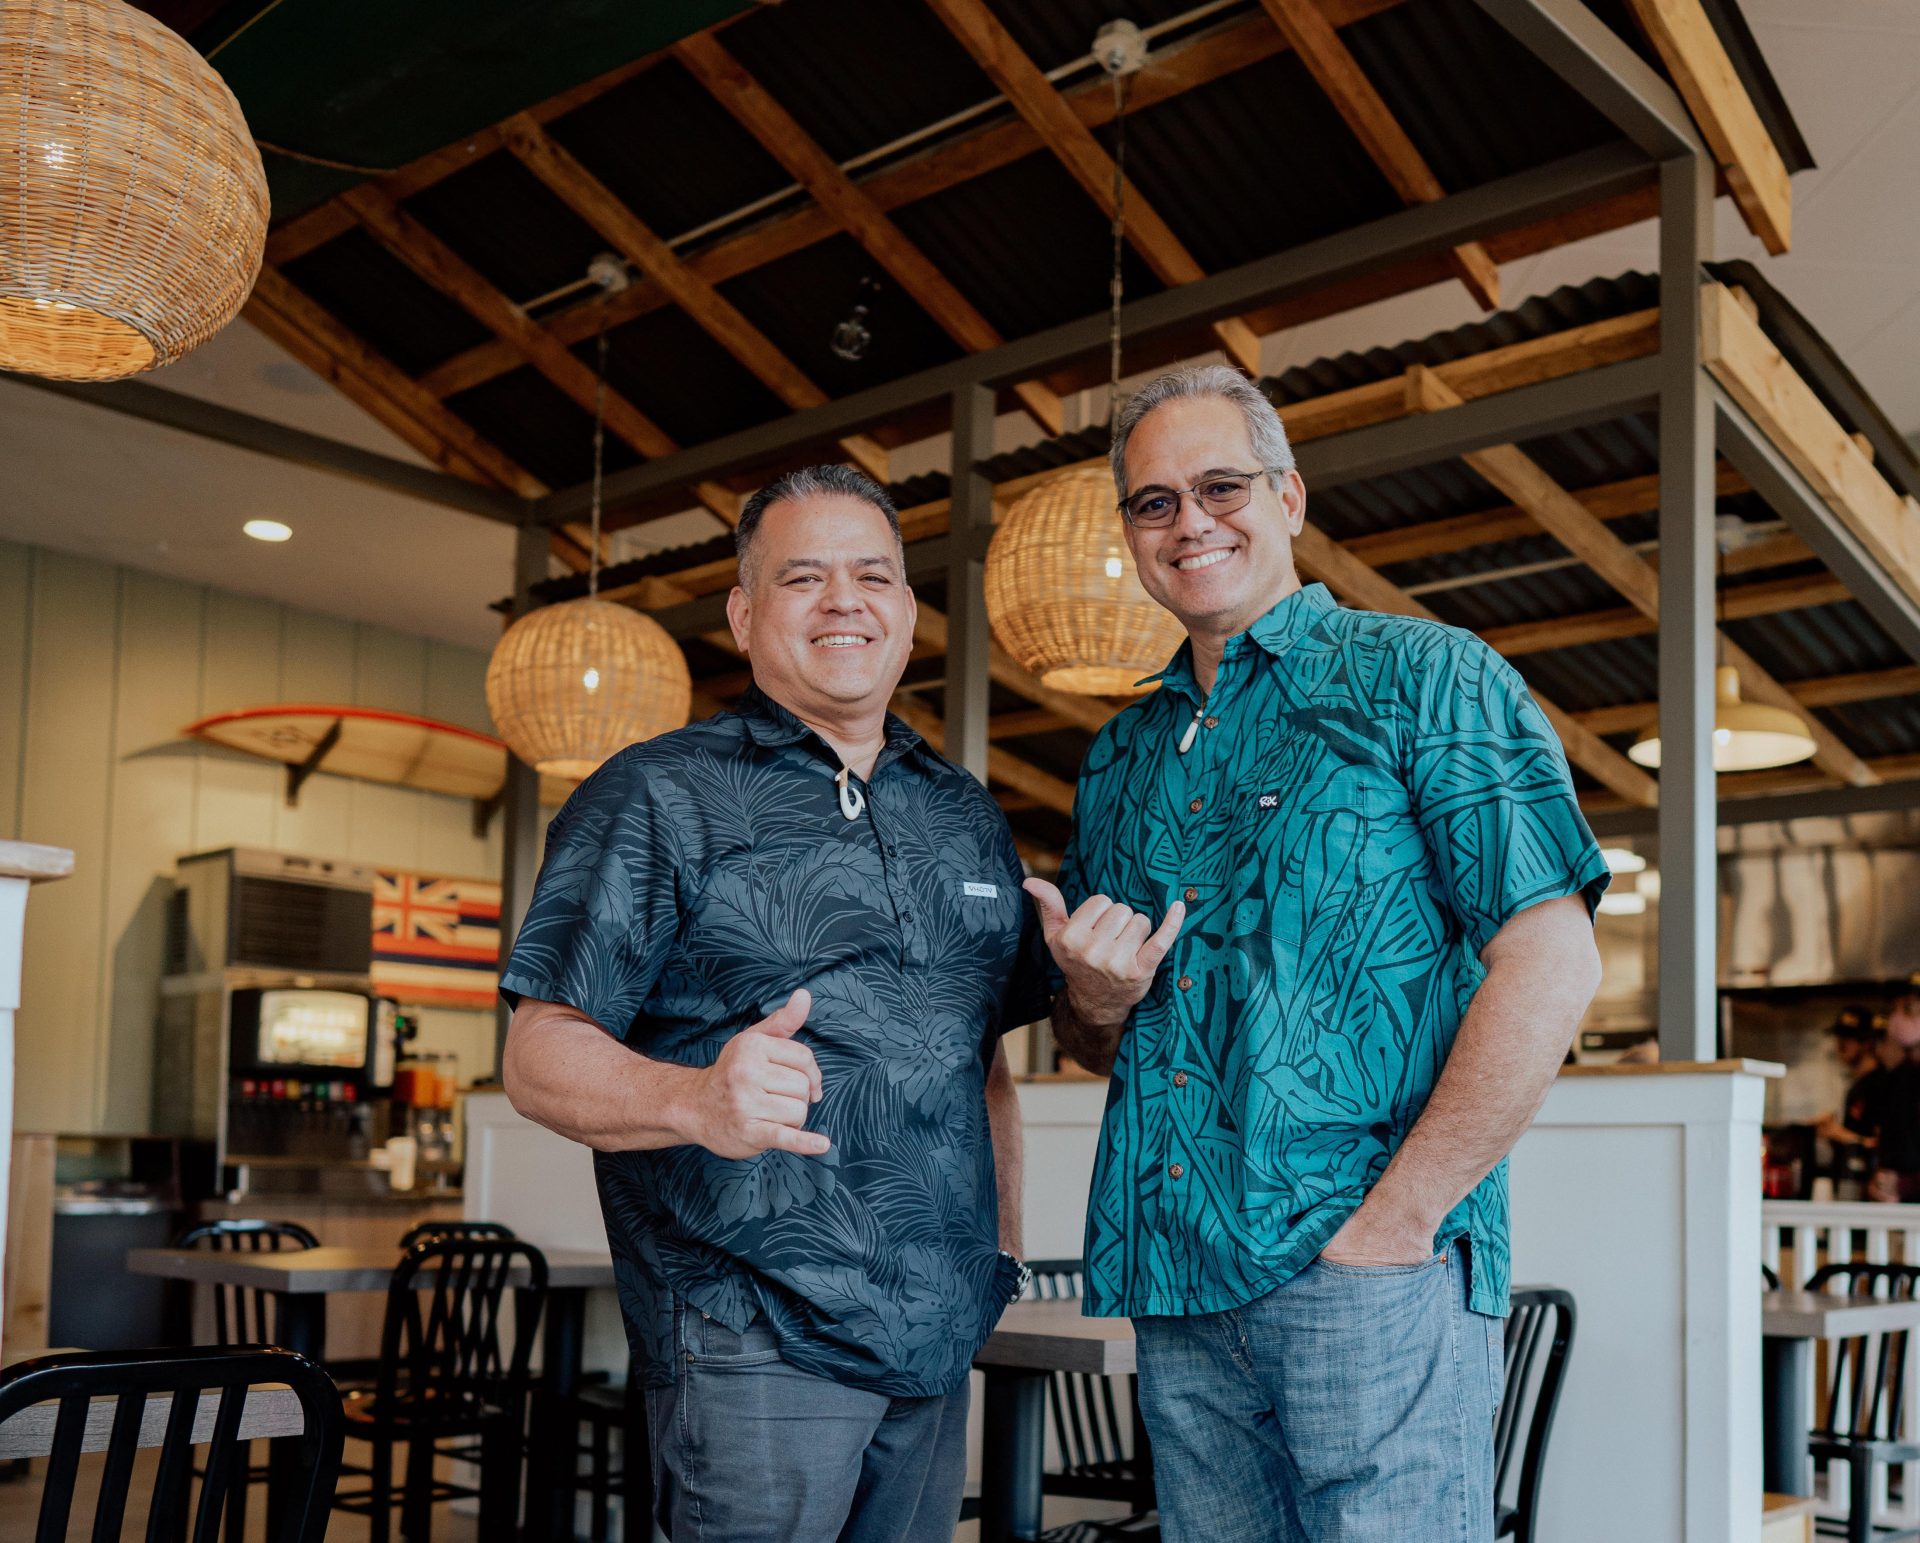 Mo’ Bettahs, the Chain Bringing the Island of Oahu to Guests